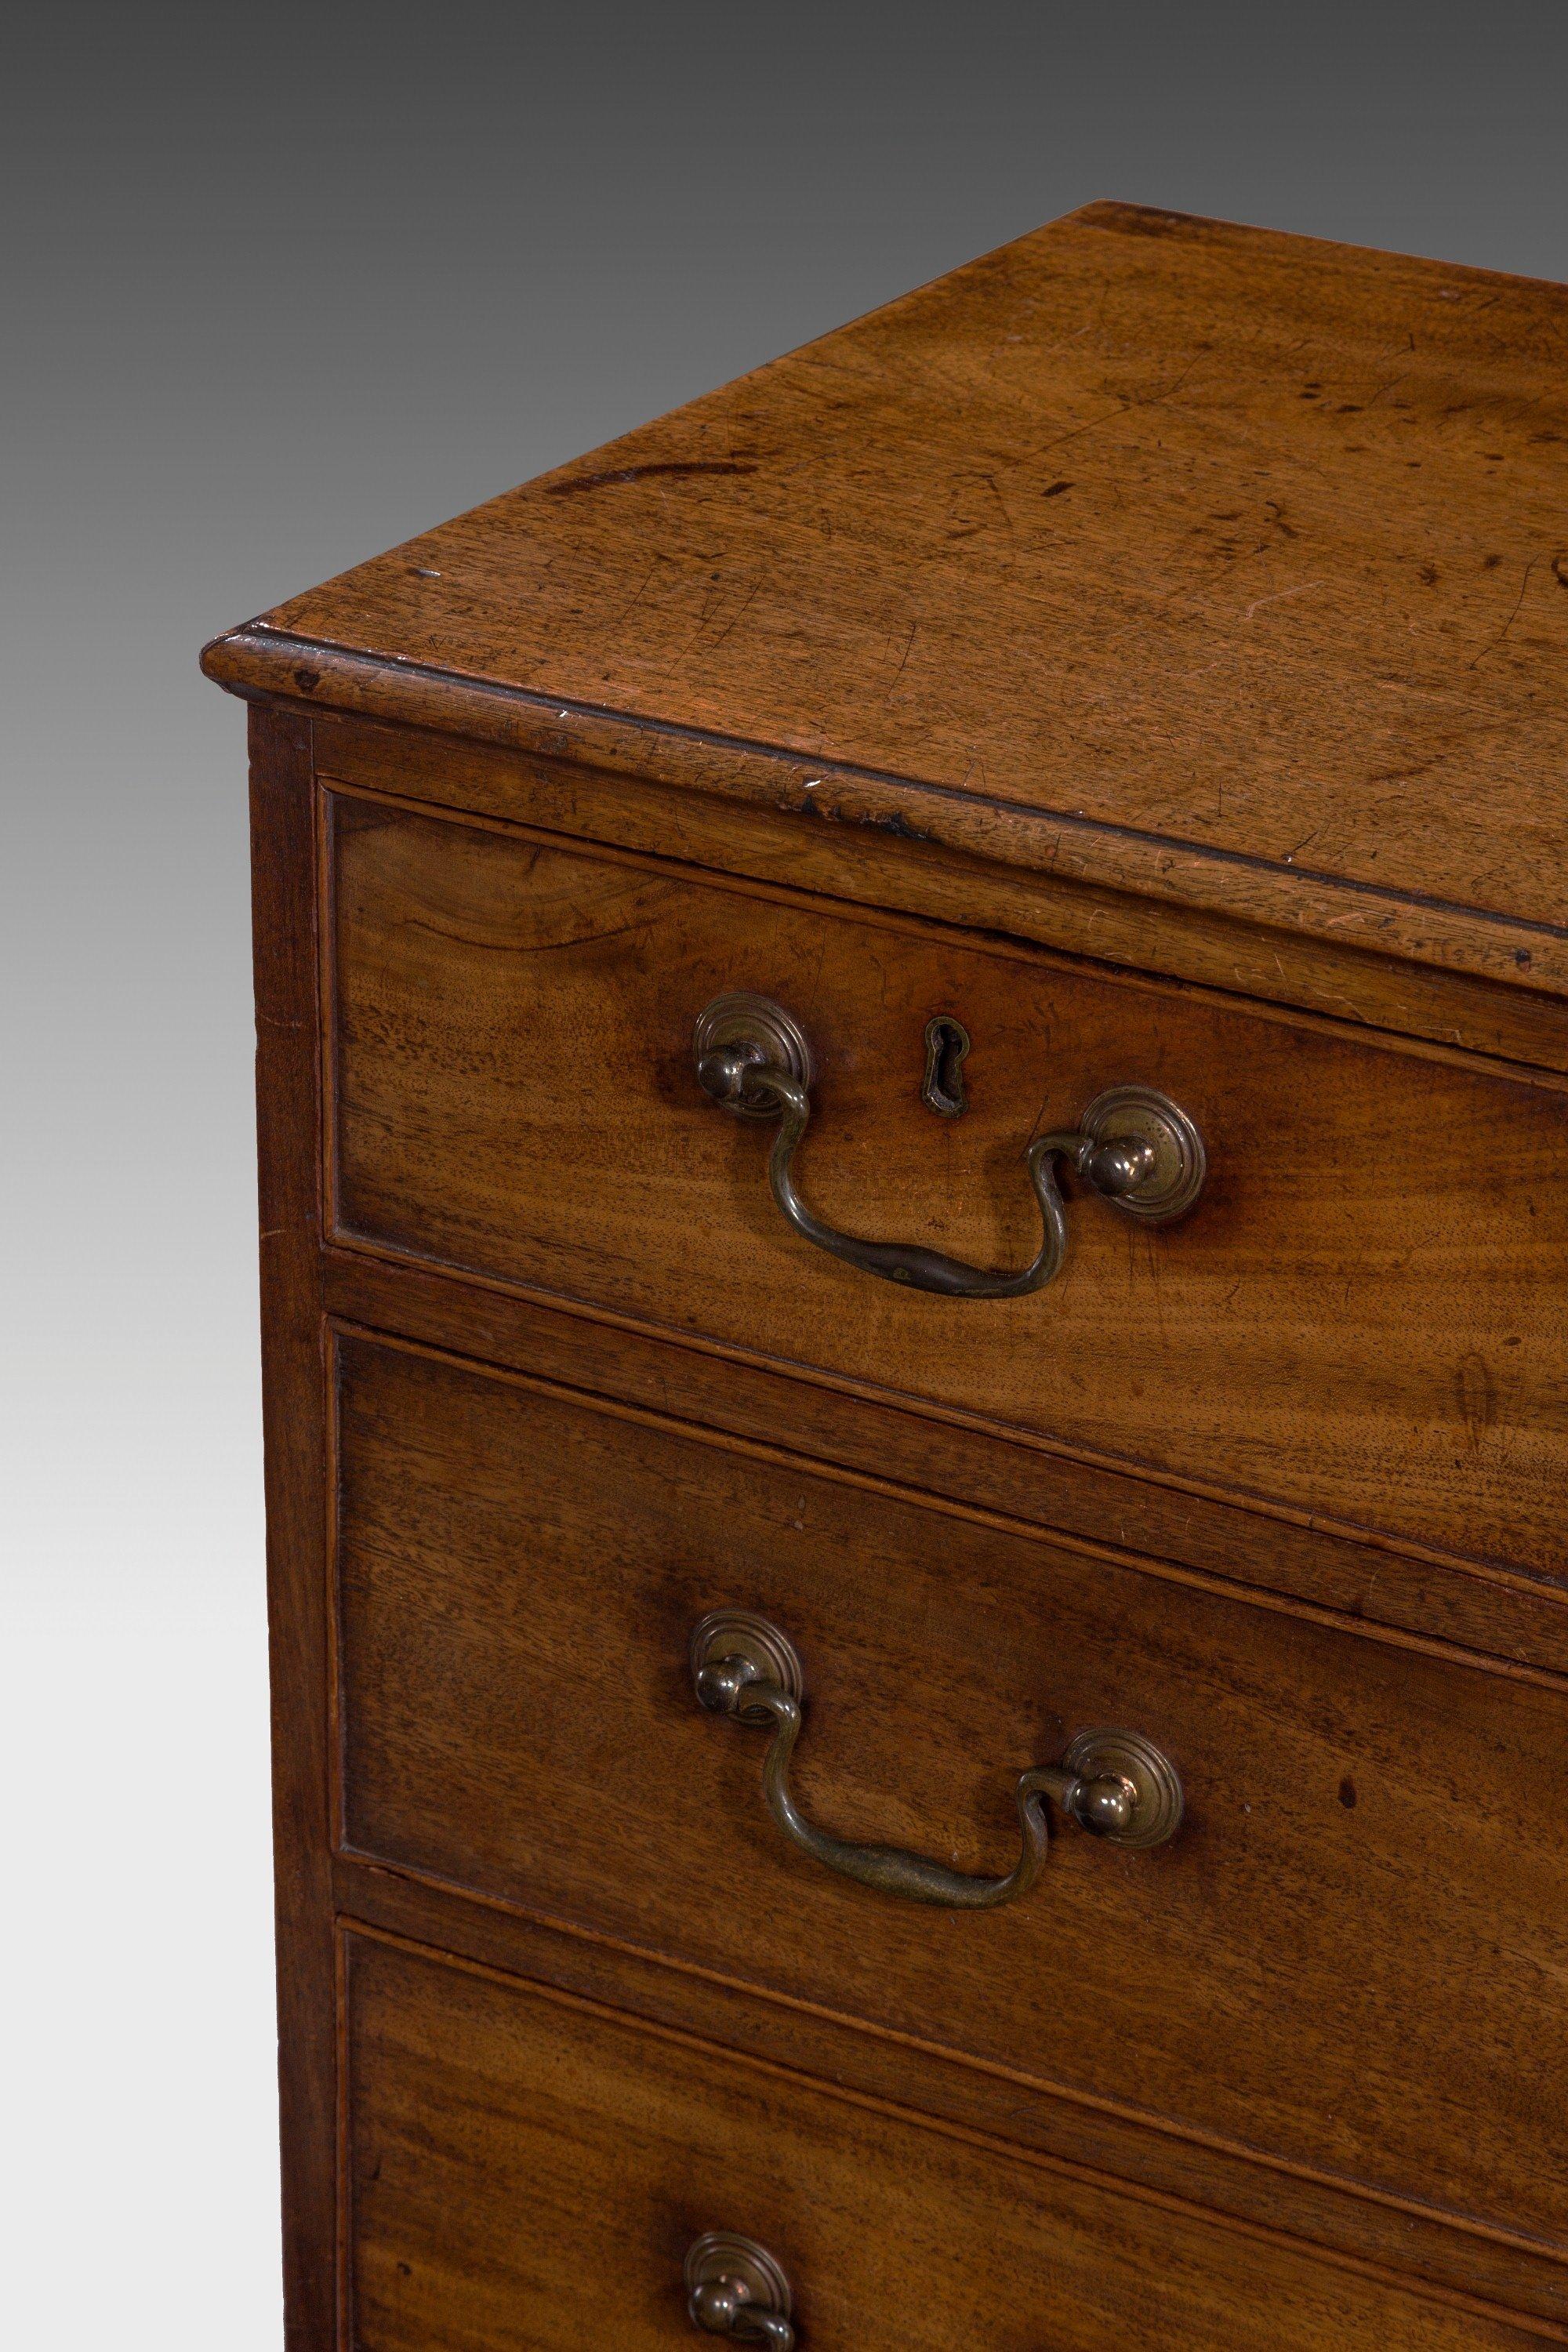 This lovely George III period mahogany chest of drawers is of elegant tall and narrow proportions and glowing warm color, with two over three graduated drawers retaining the original brassware, all on unusual shaped bracket feet. ¬†.